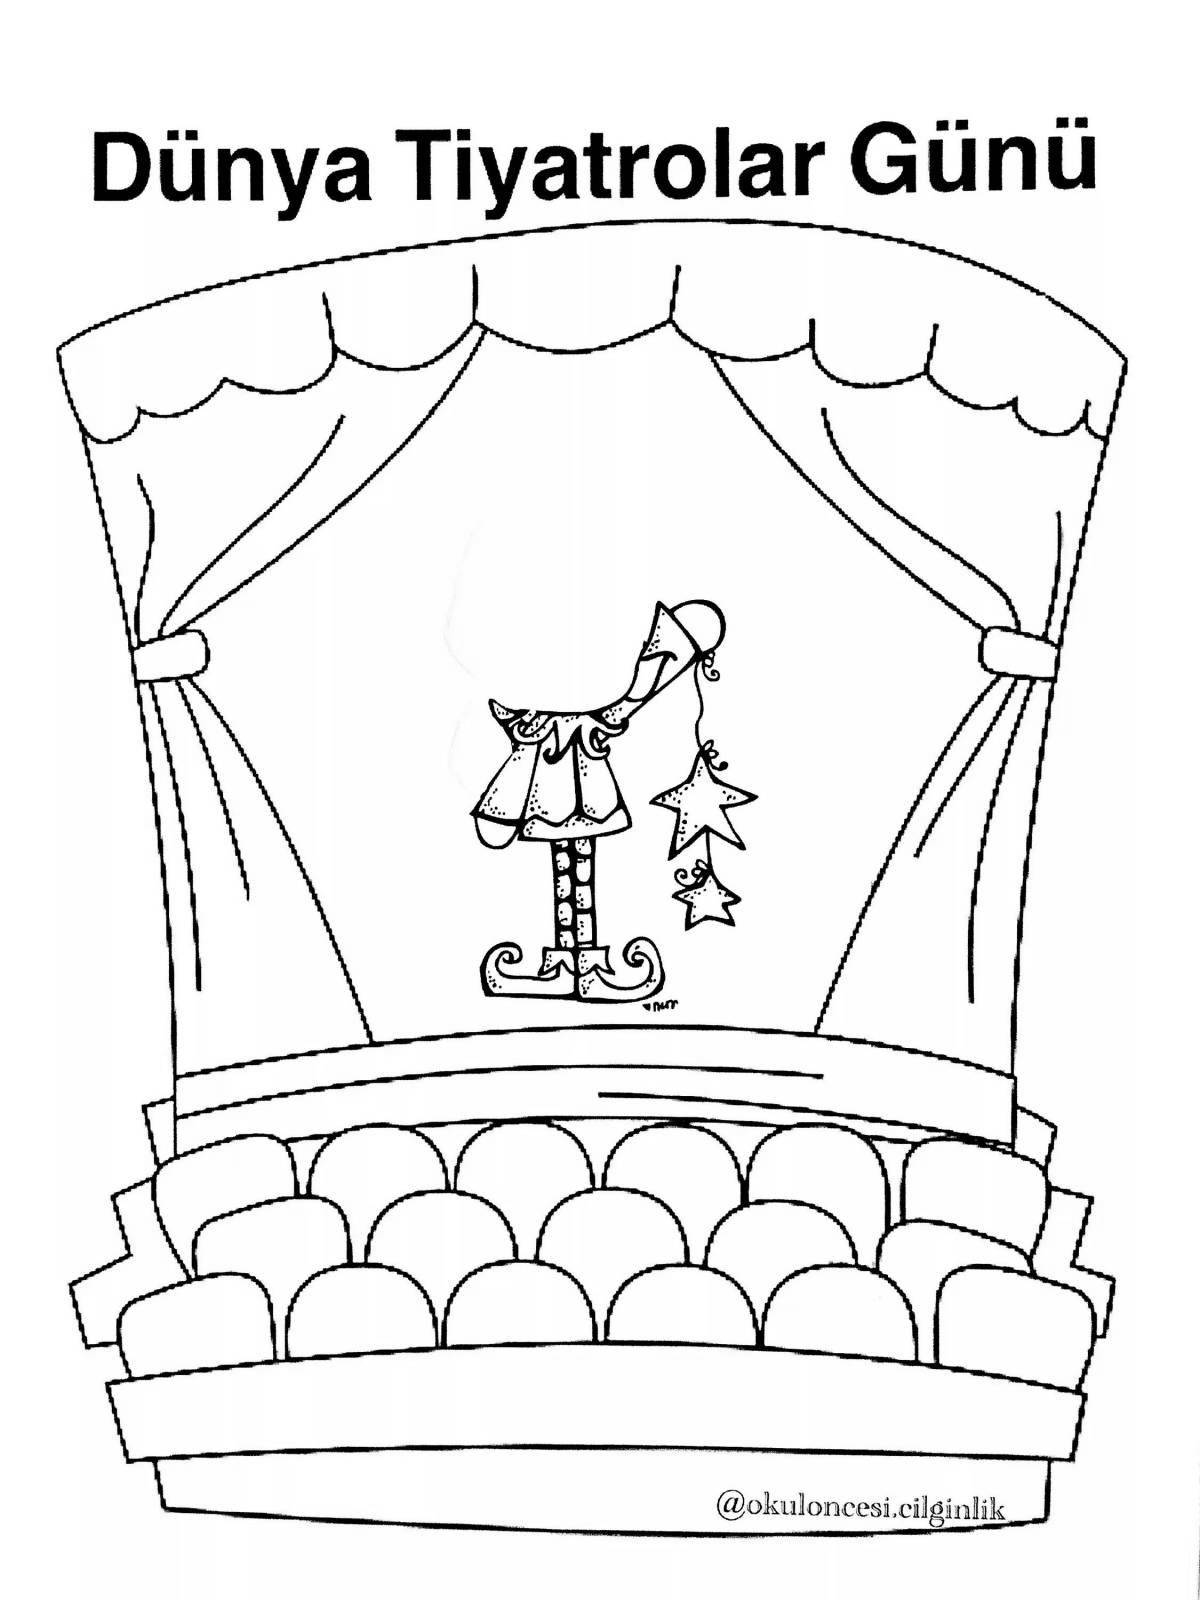 Playful stage theater coloring page